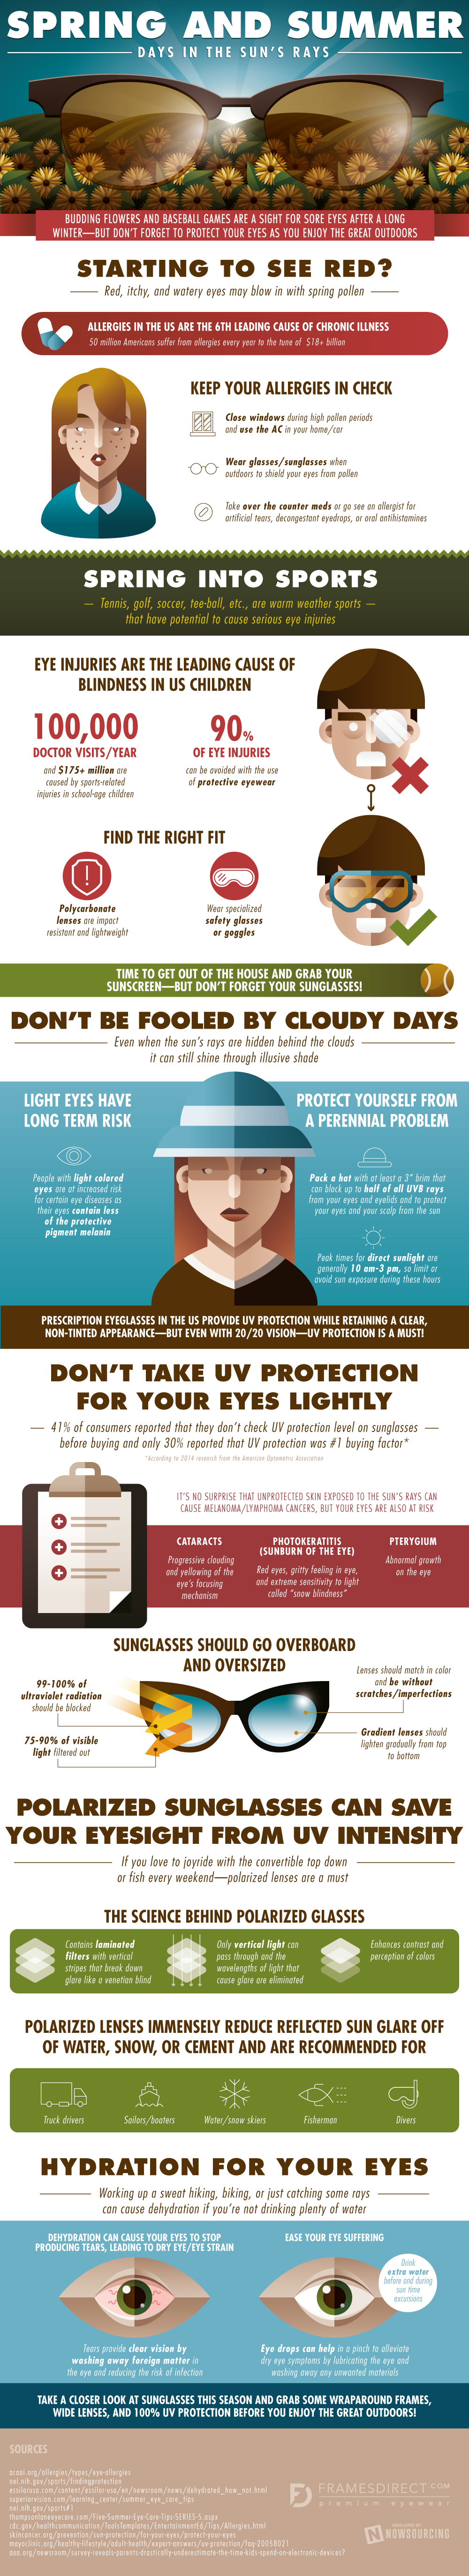 Seeing Red? Take Care Of Those Eyes [infographic]